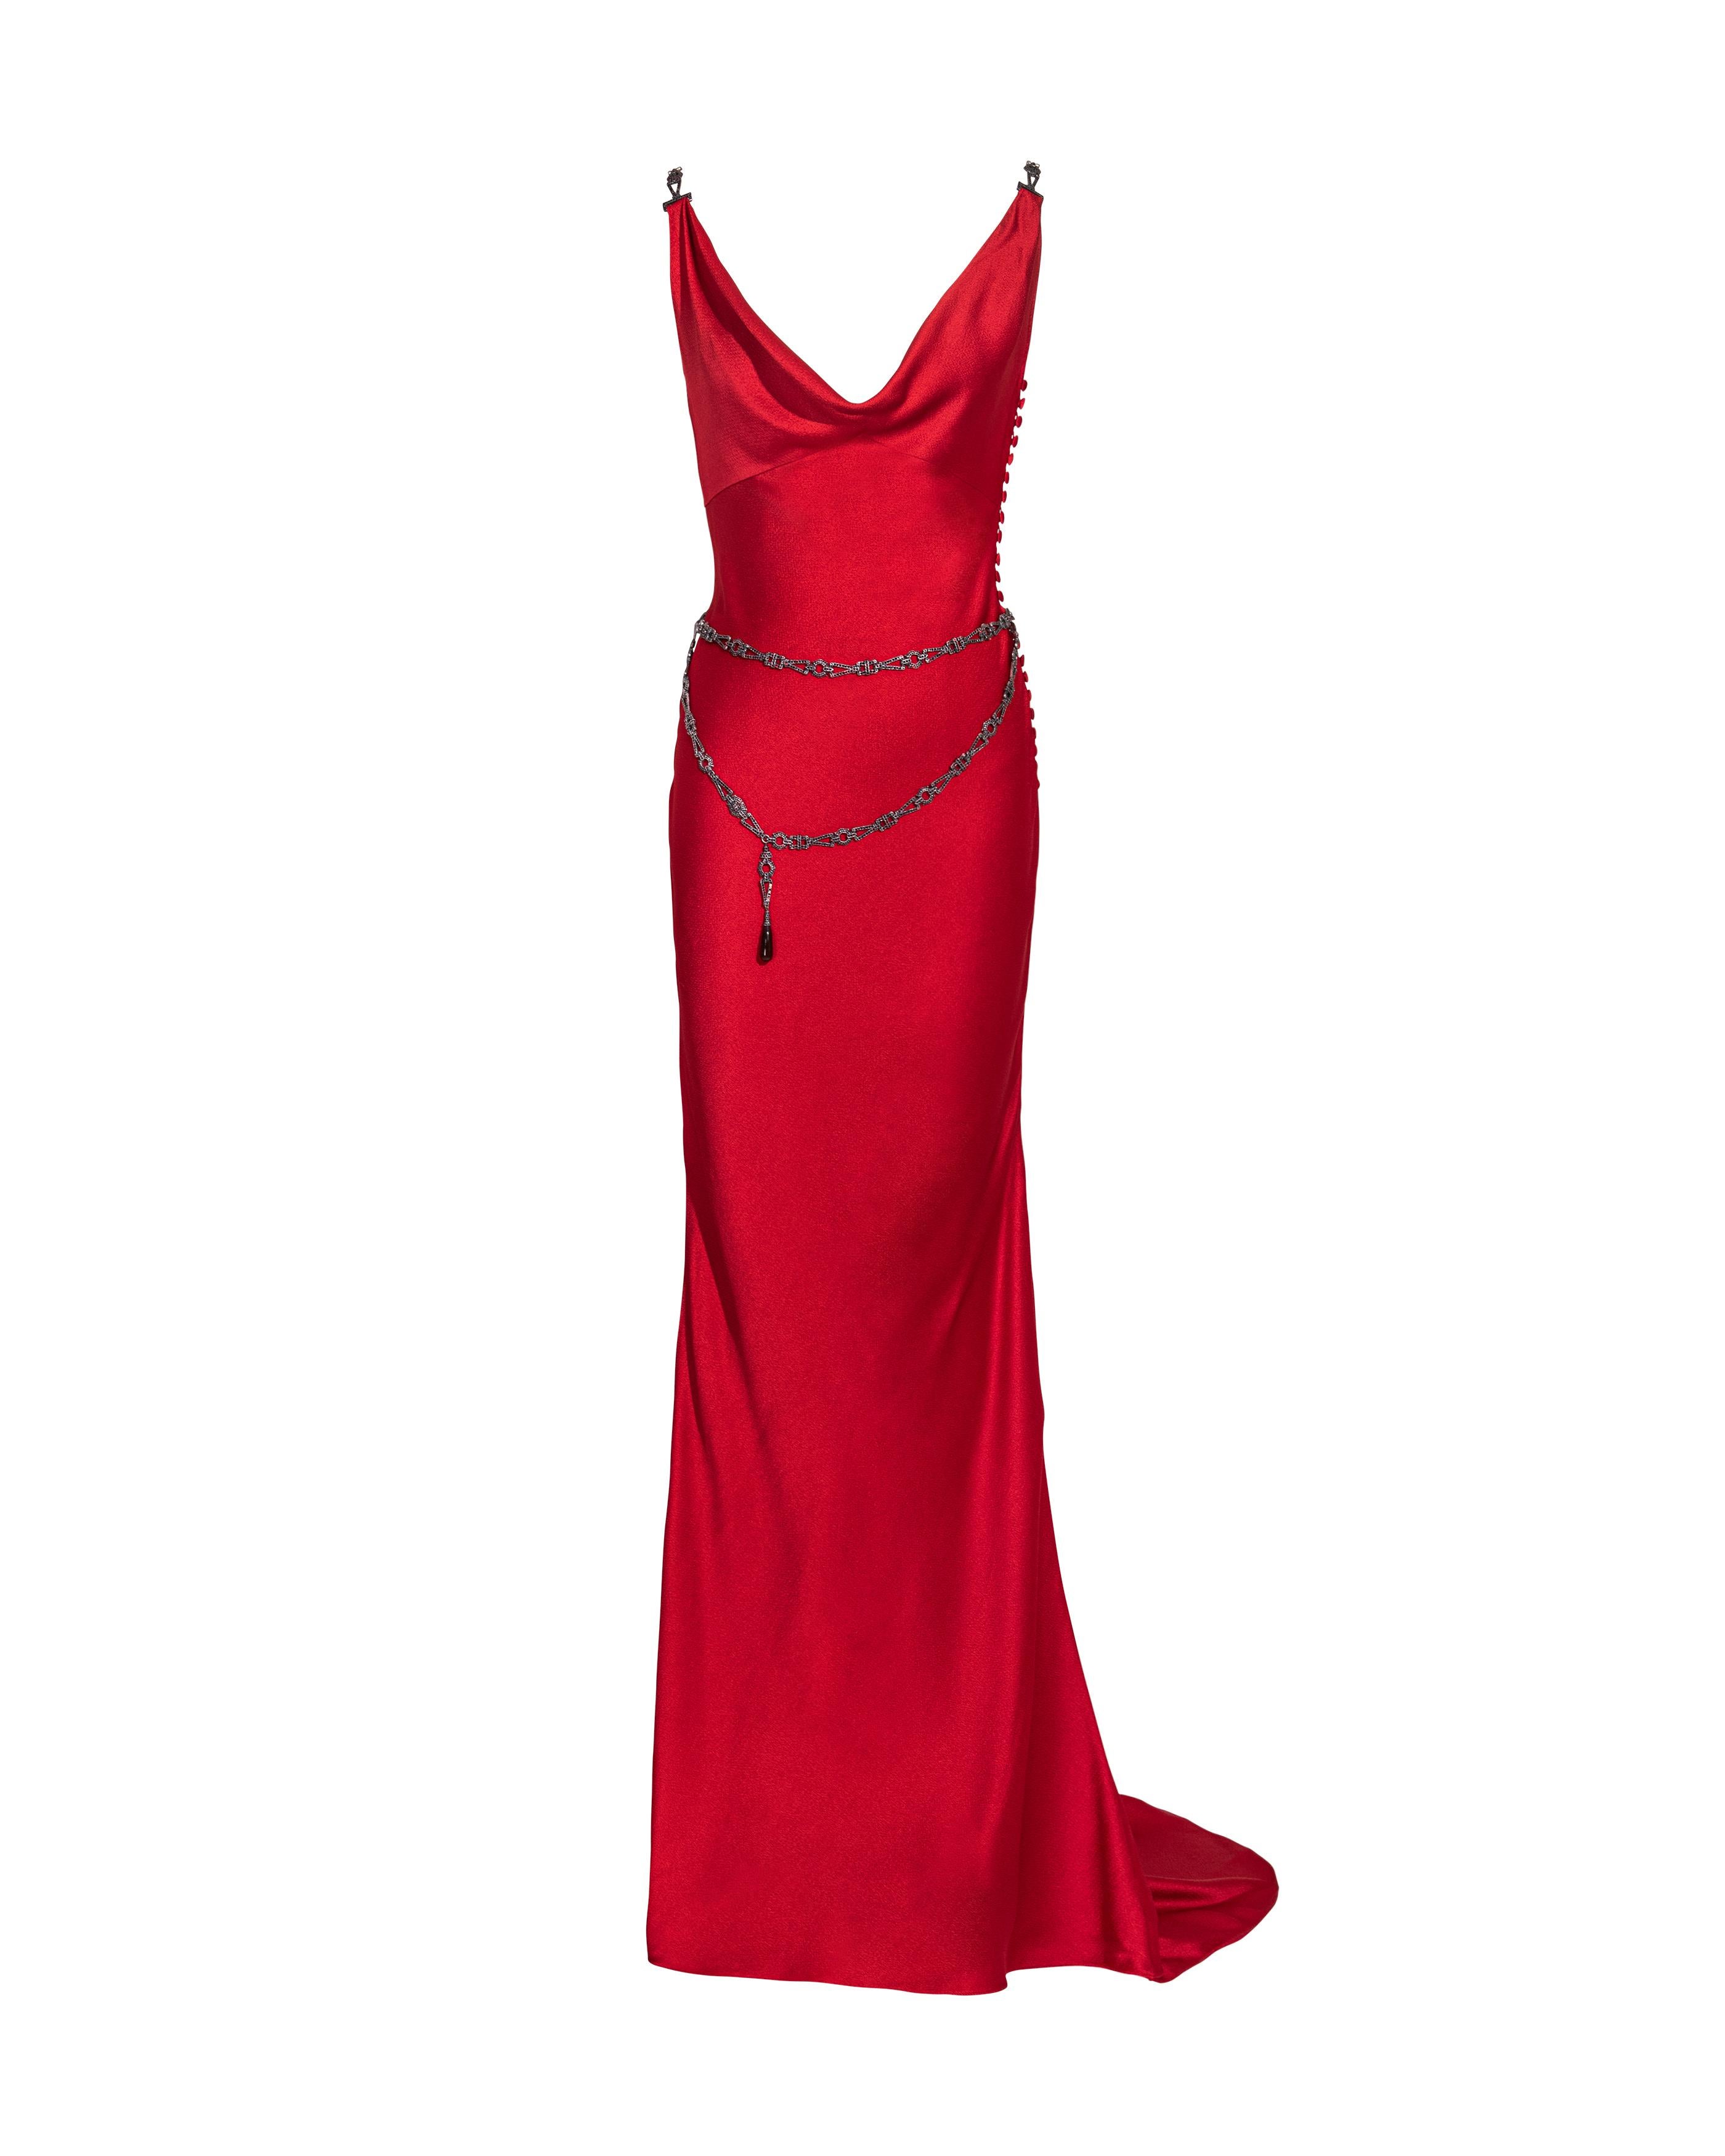 S/S 2000 Christian Dior by John Galliano Red Bias Cut Gown with Jeweled Belt 3